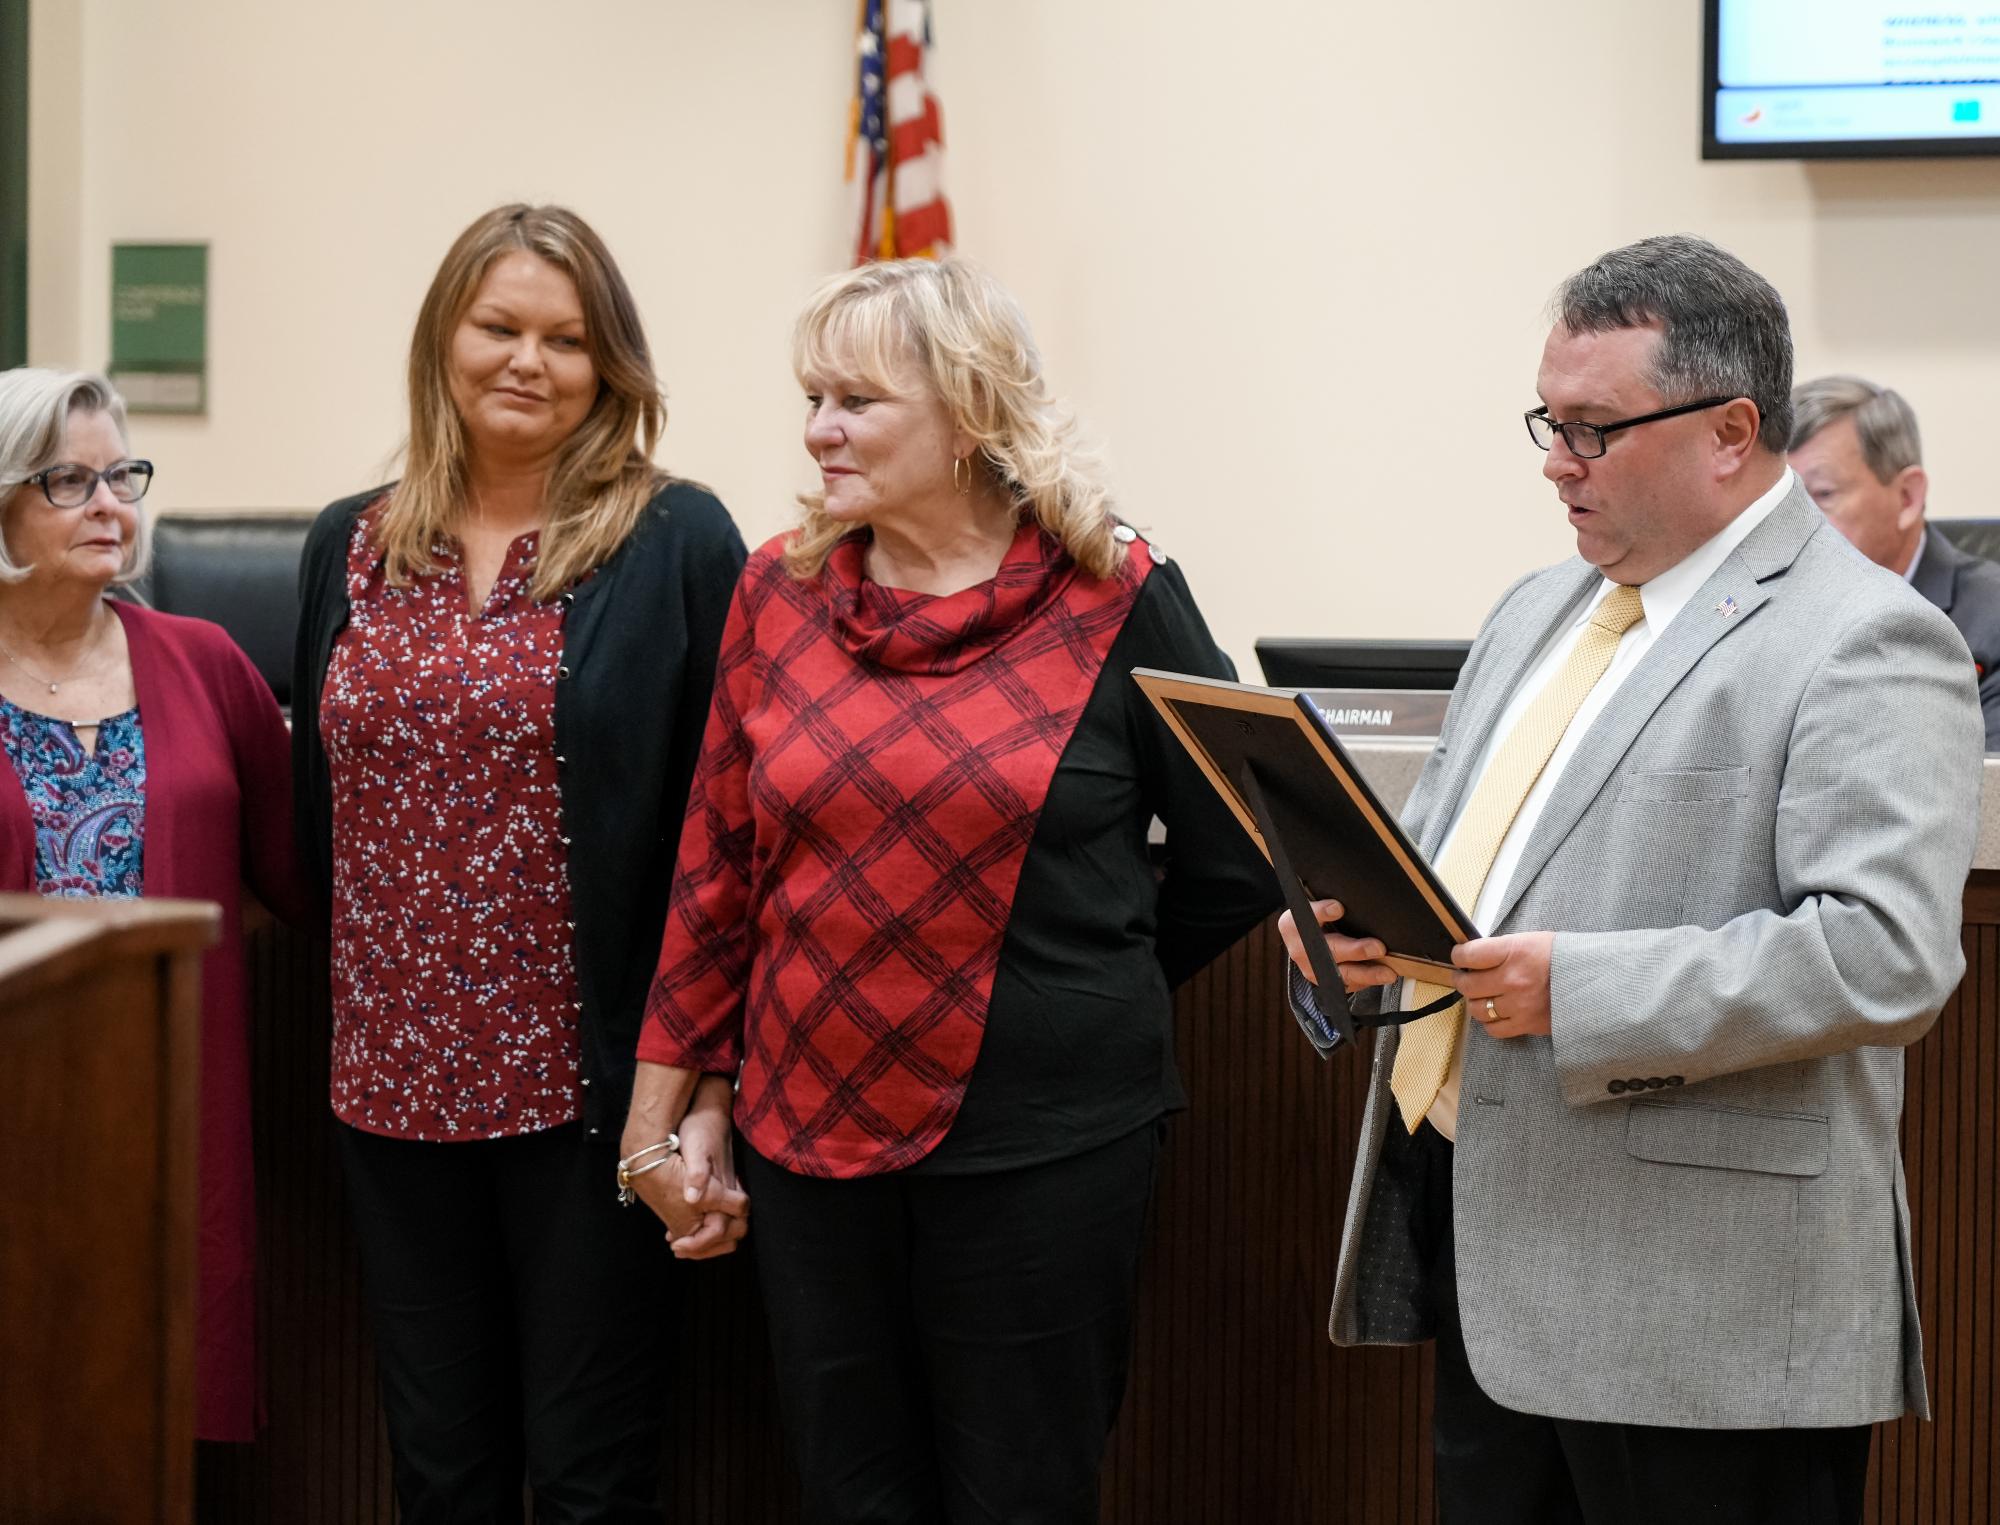 Mayor Bozeman honored by Brunswick Board of Commissioners